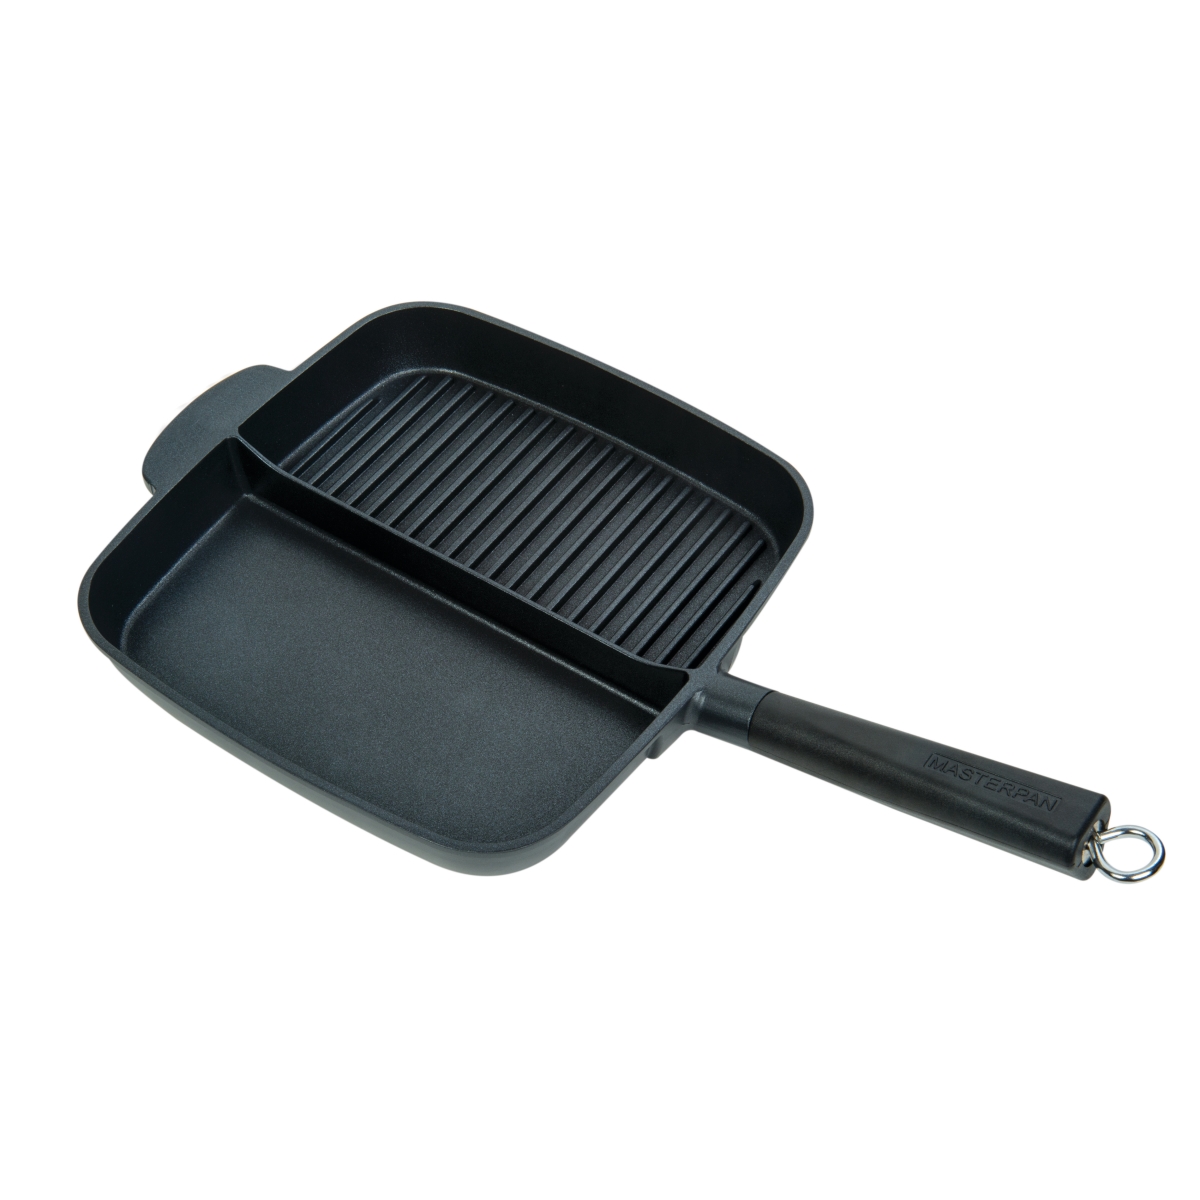 Picture of Masterpan MP-112 11 in. Non-Stick Cast Aluminium 2 Section Meal Skillet - Black